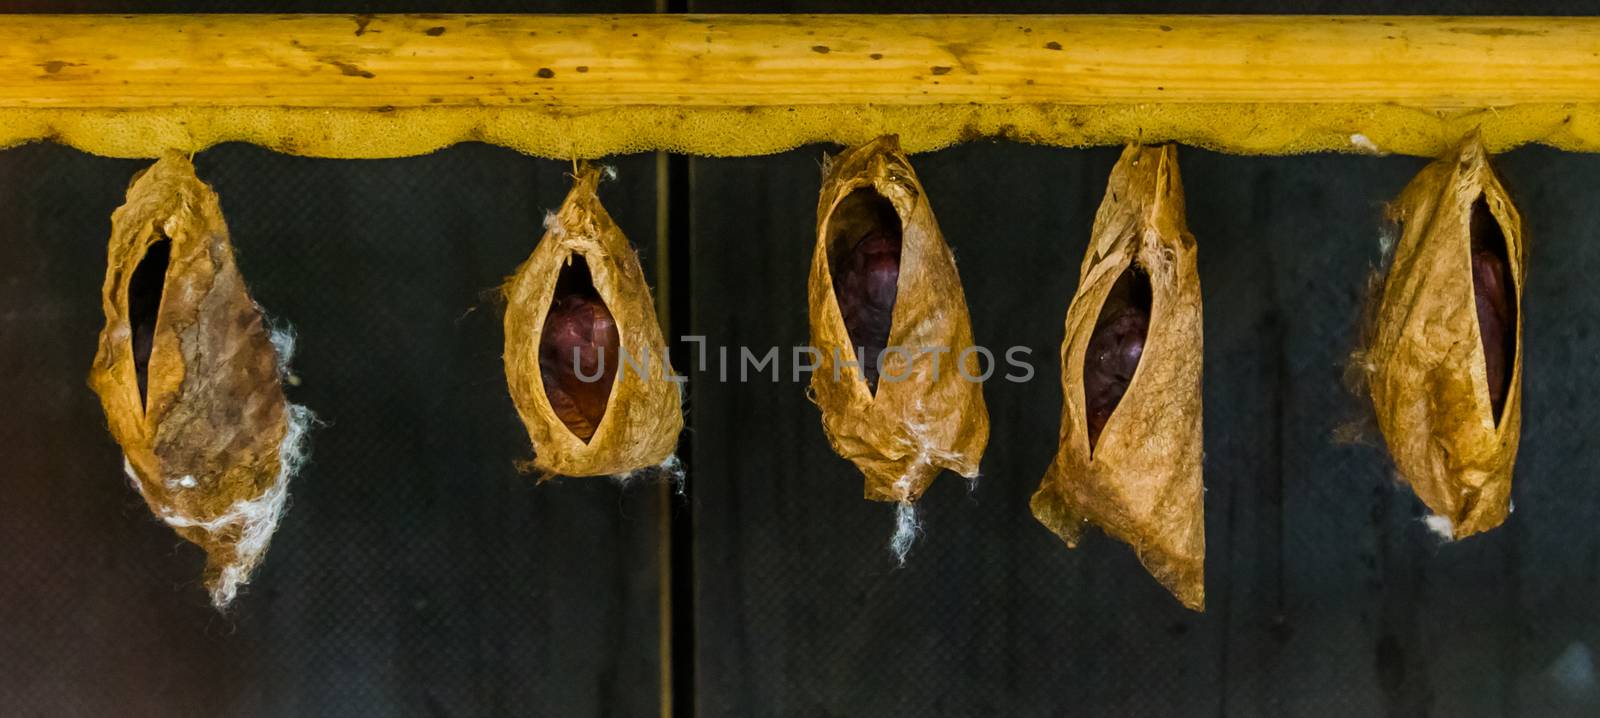 large butterfly cocoons of a tropical specie, insects undergoing metamorphosis